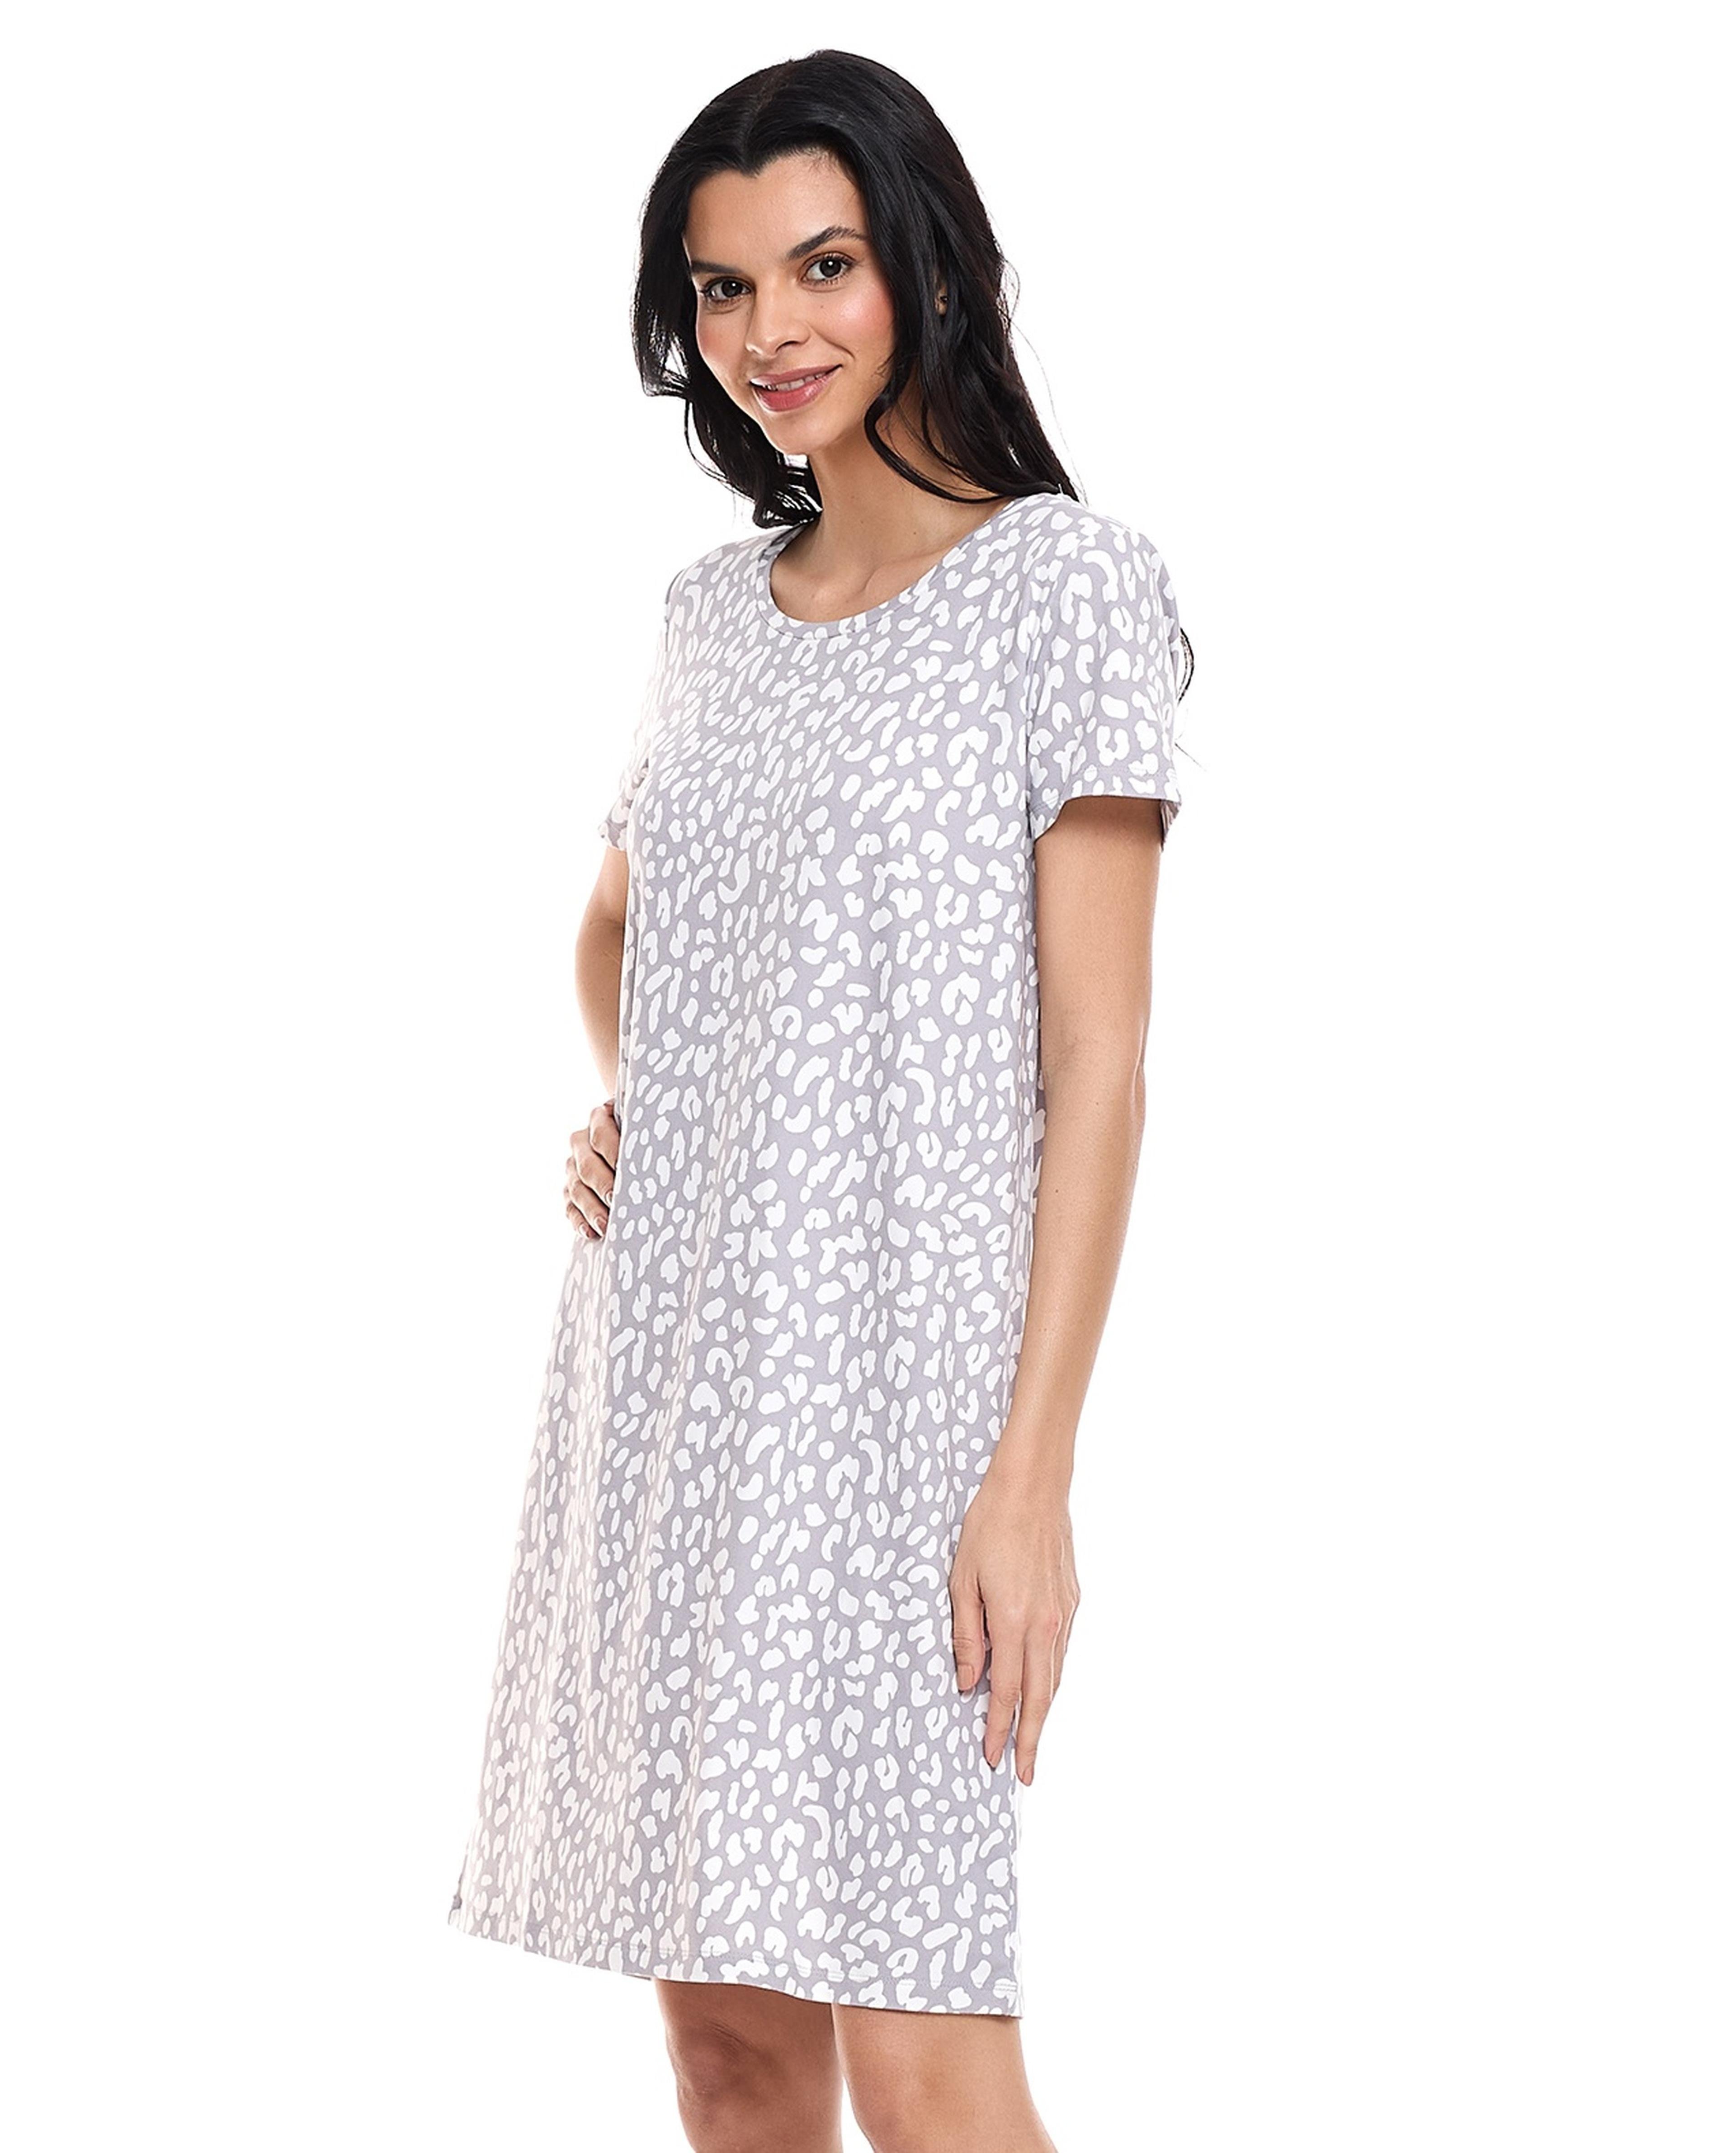 Animal Printed Nightdress with Crew Neck and Short Sleeves